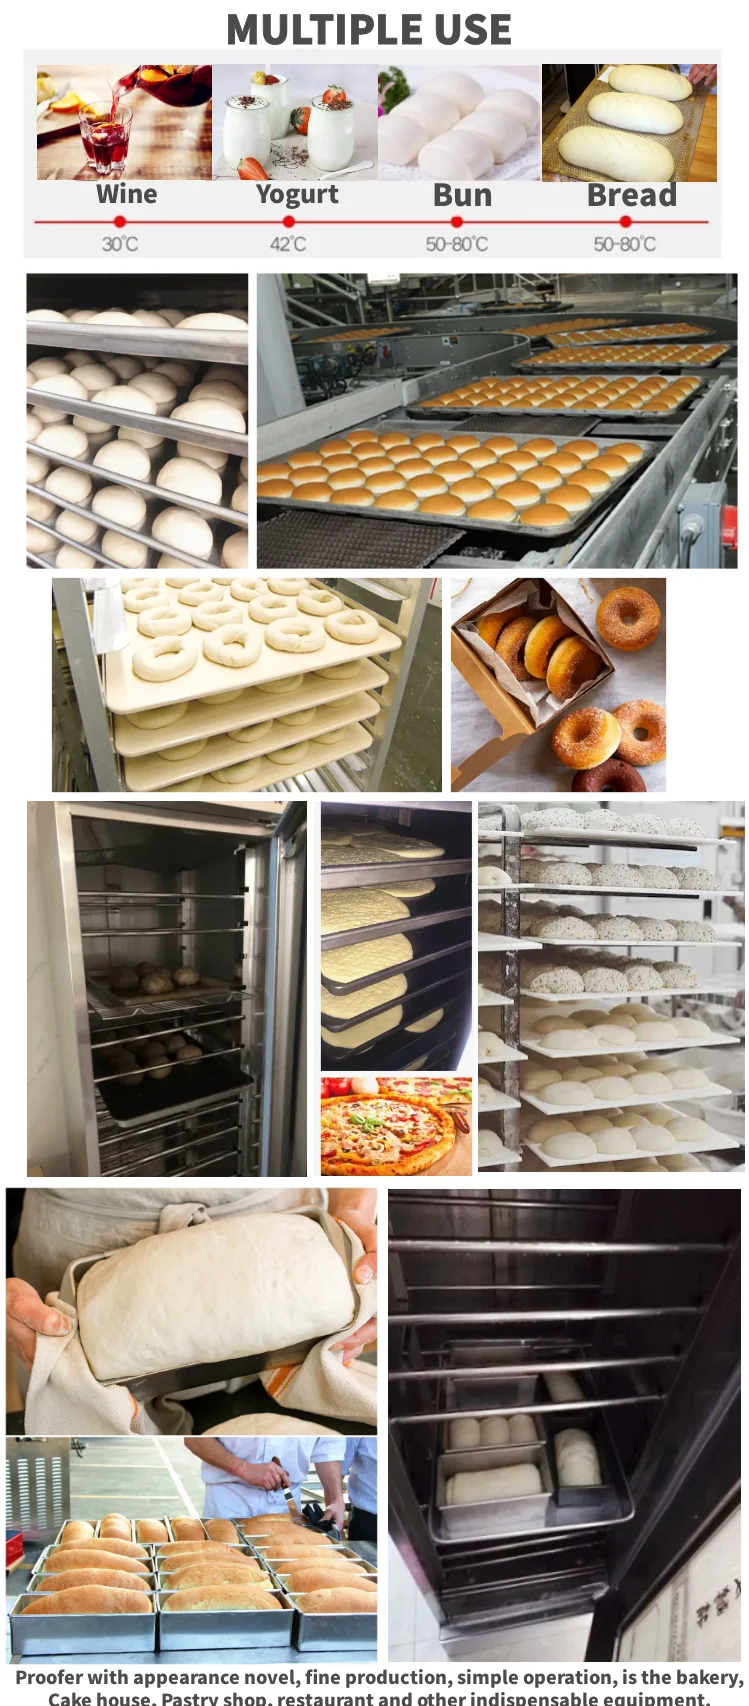 Bakery pizza donut home mini industrial bread proofers oven room basket temperature and humidity,heater proofer retarder machine